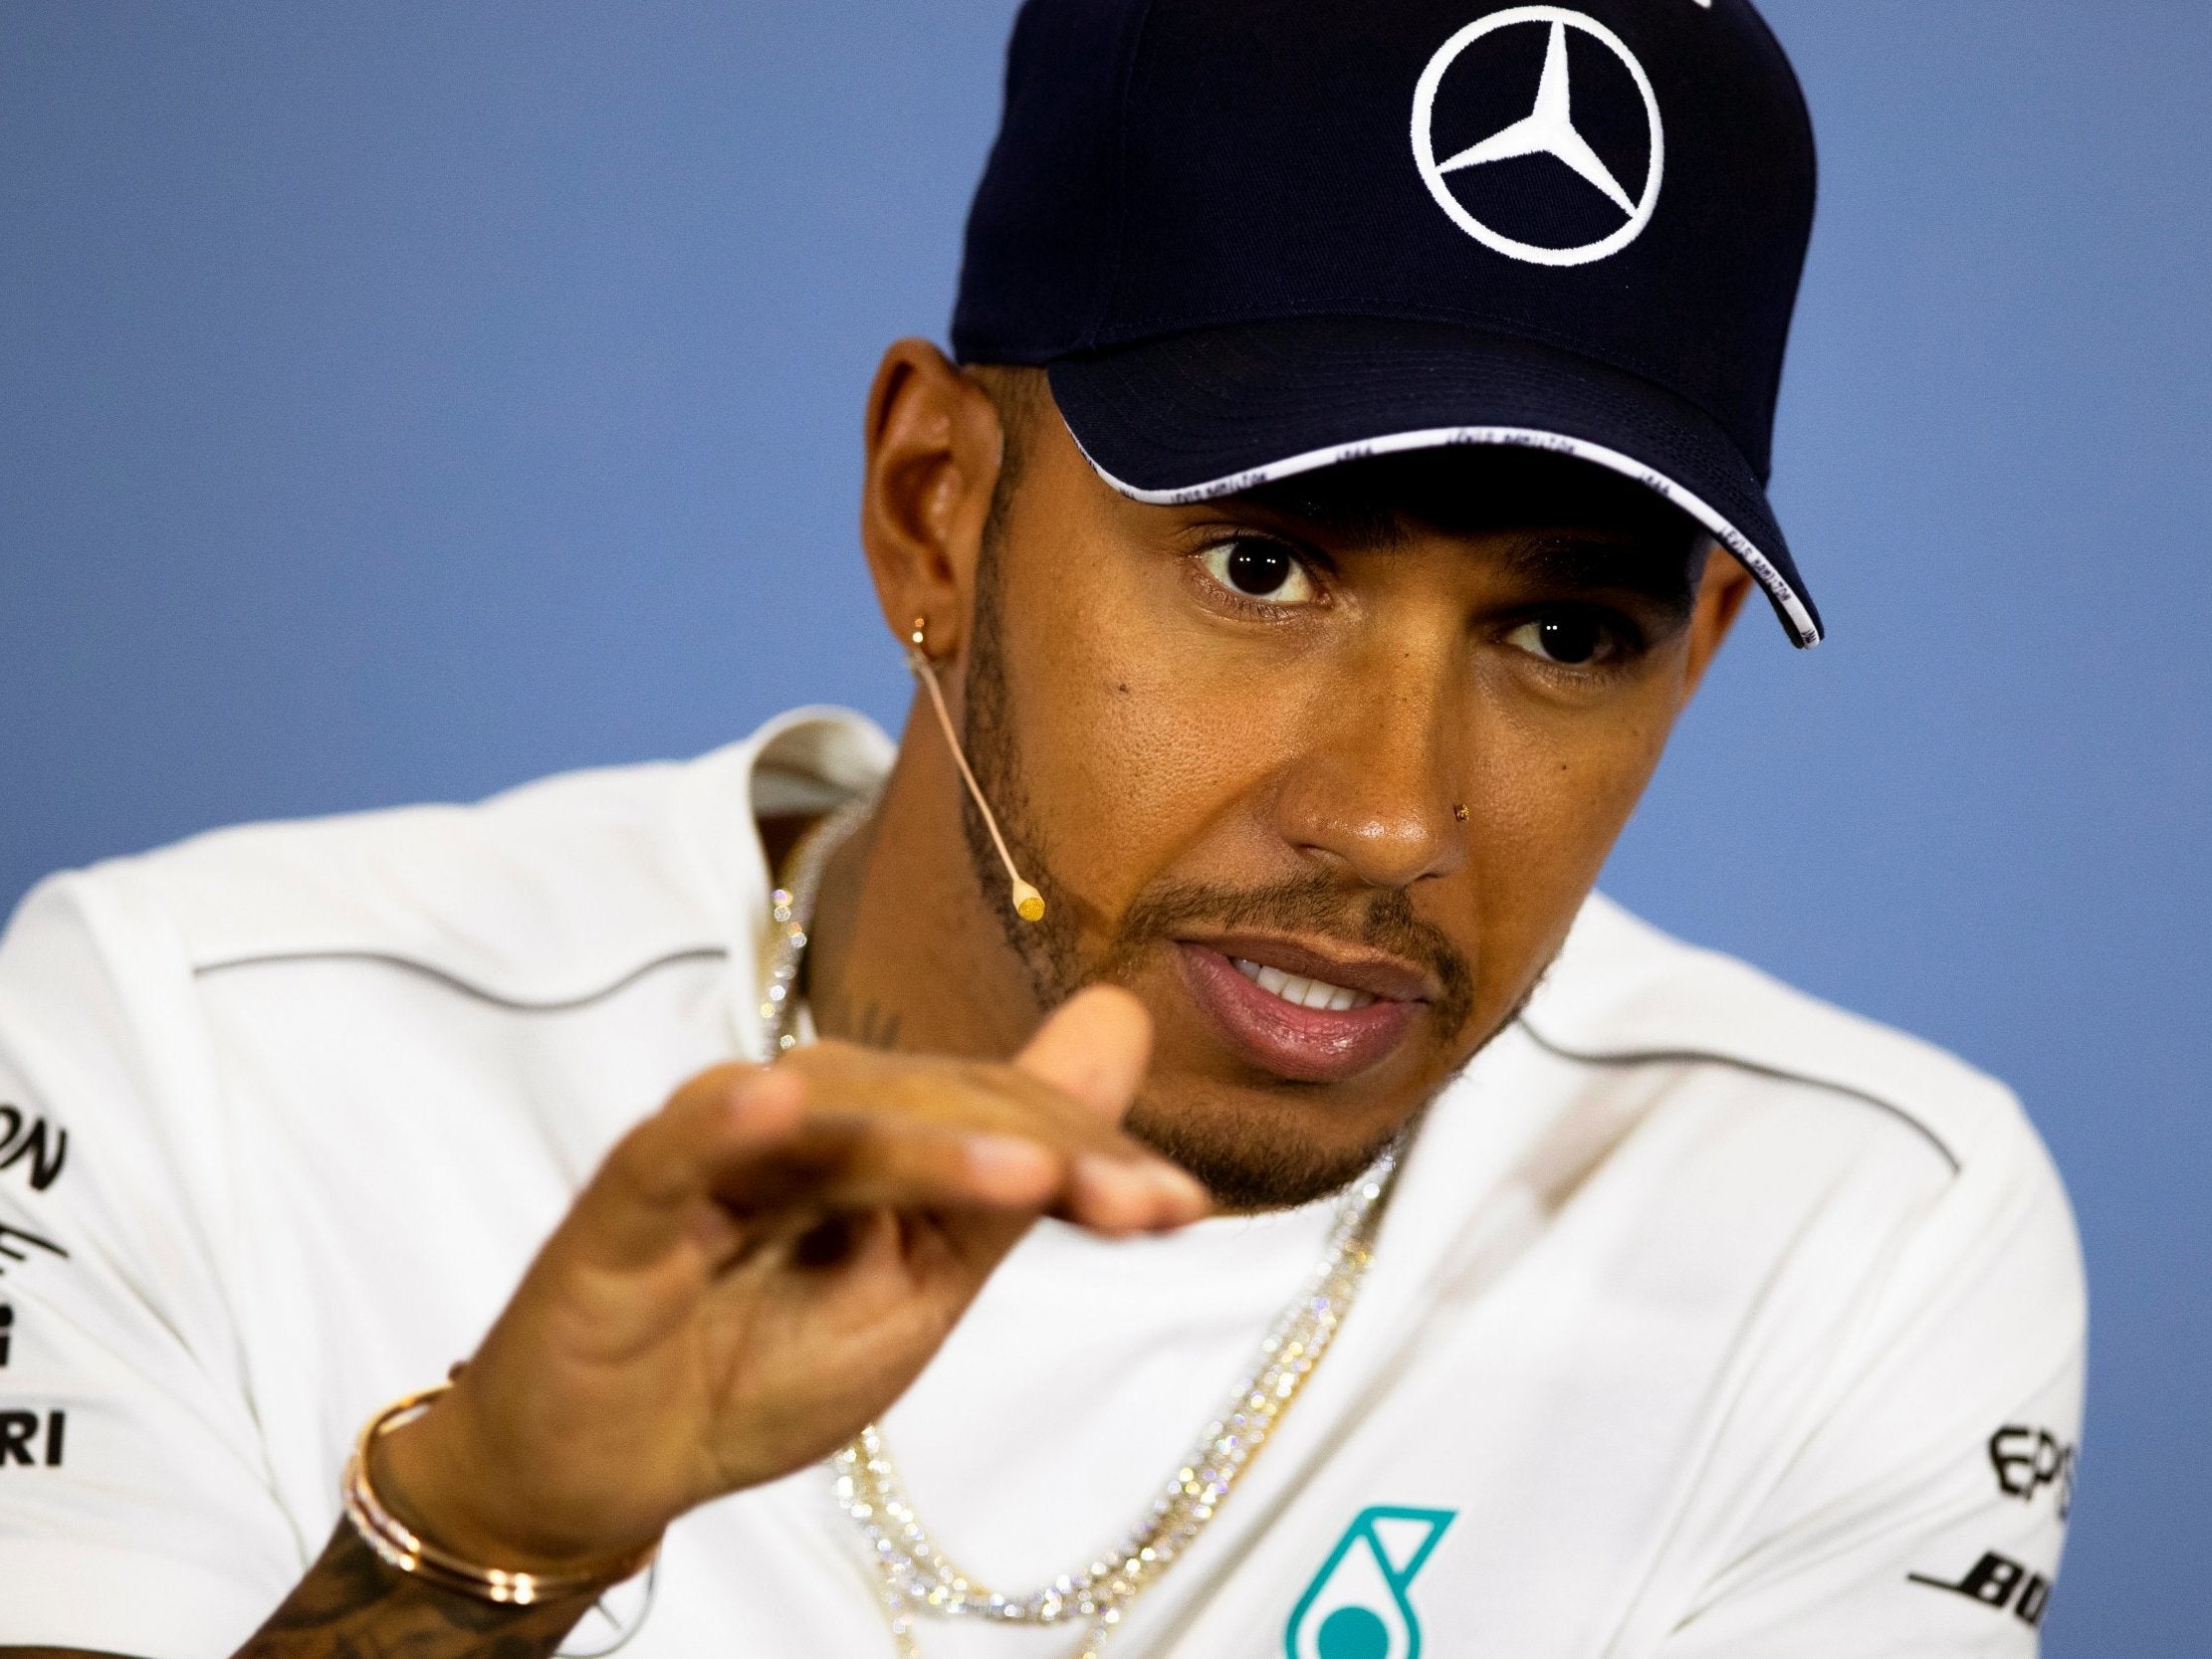 Lewis Hamilton can become the first man to win the British Grand Prix six times this weekend